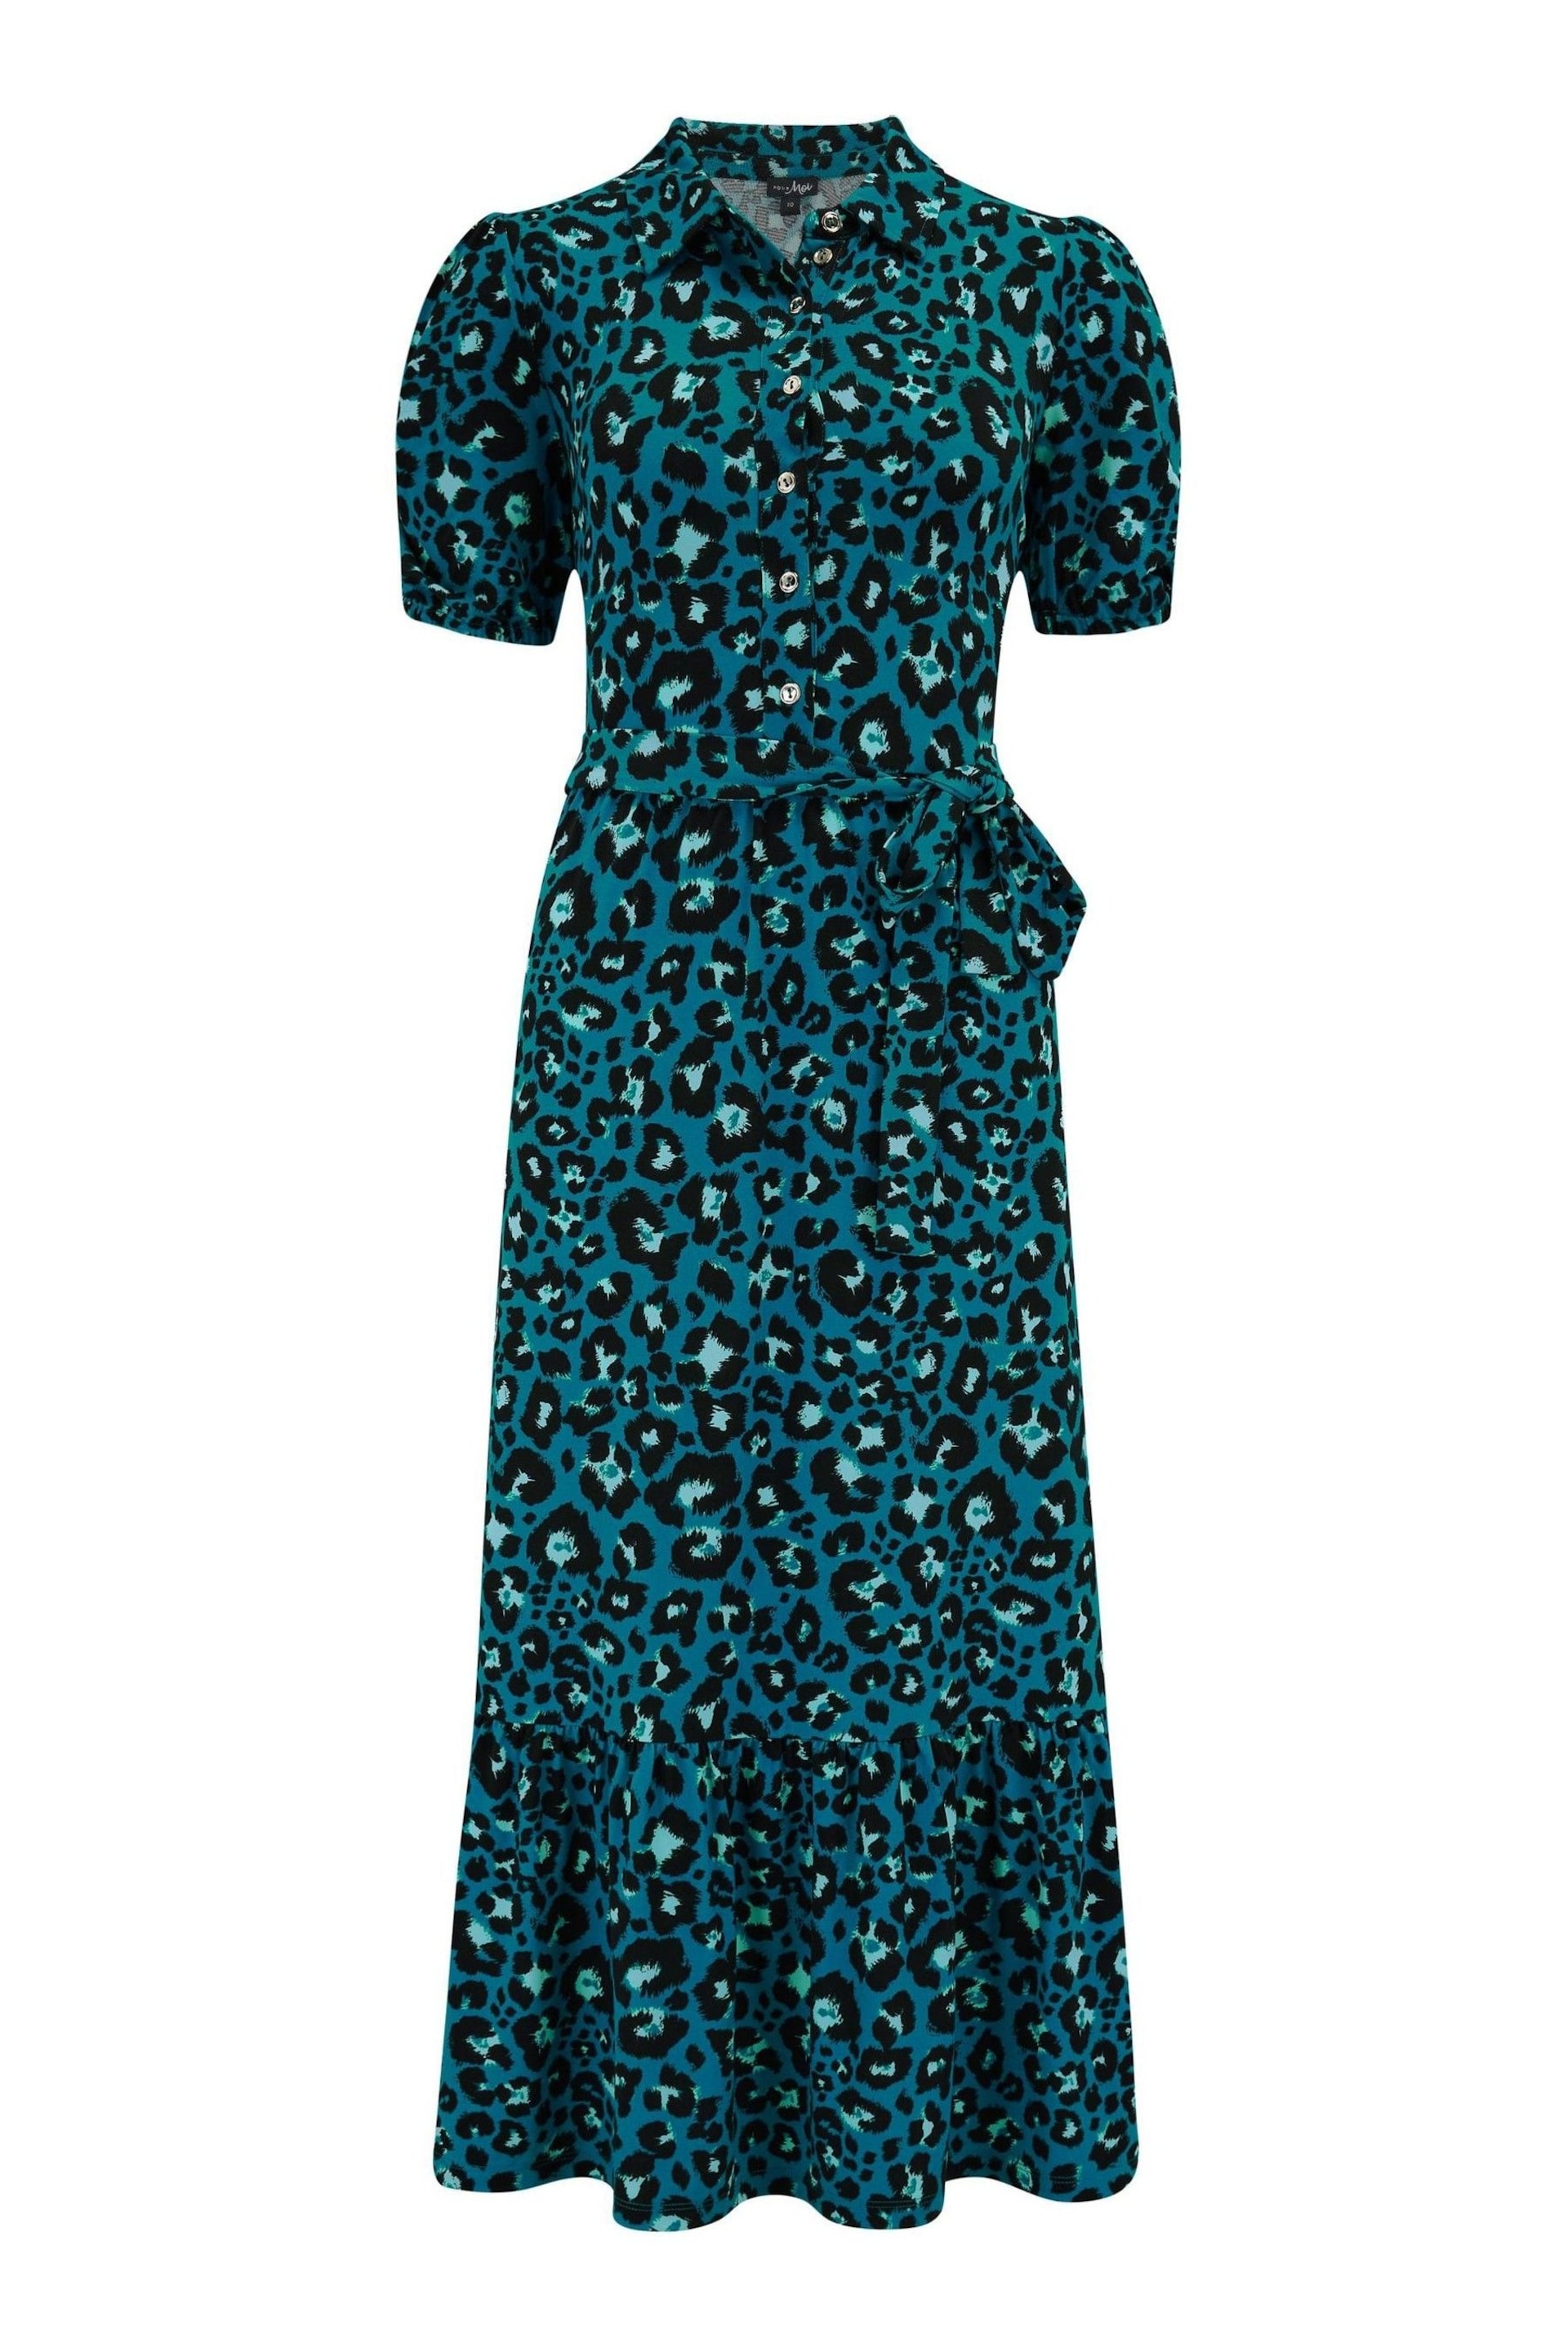 Pour Moi Blue Jodie Fuller Bust Slinky Jersey Tiered Midi Shirt Dress - Image 3 of 4